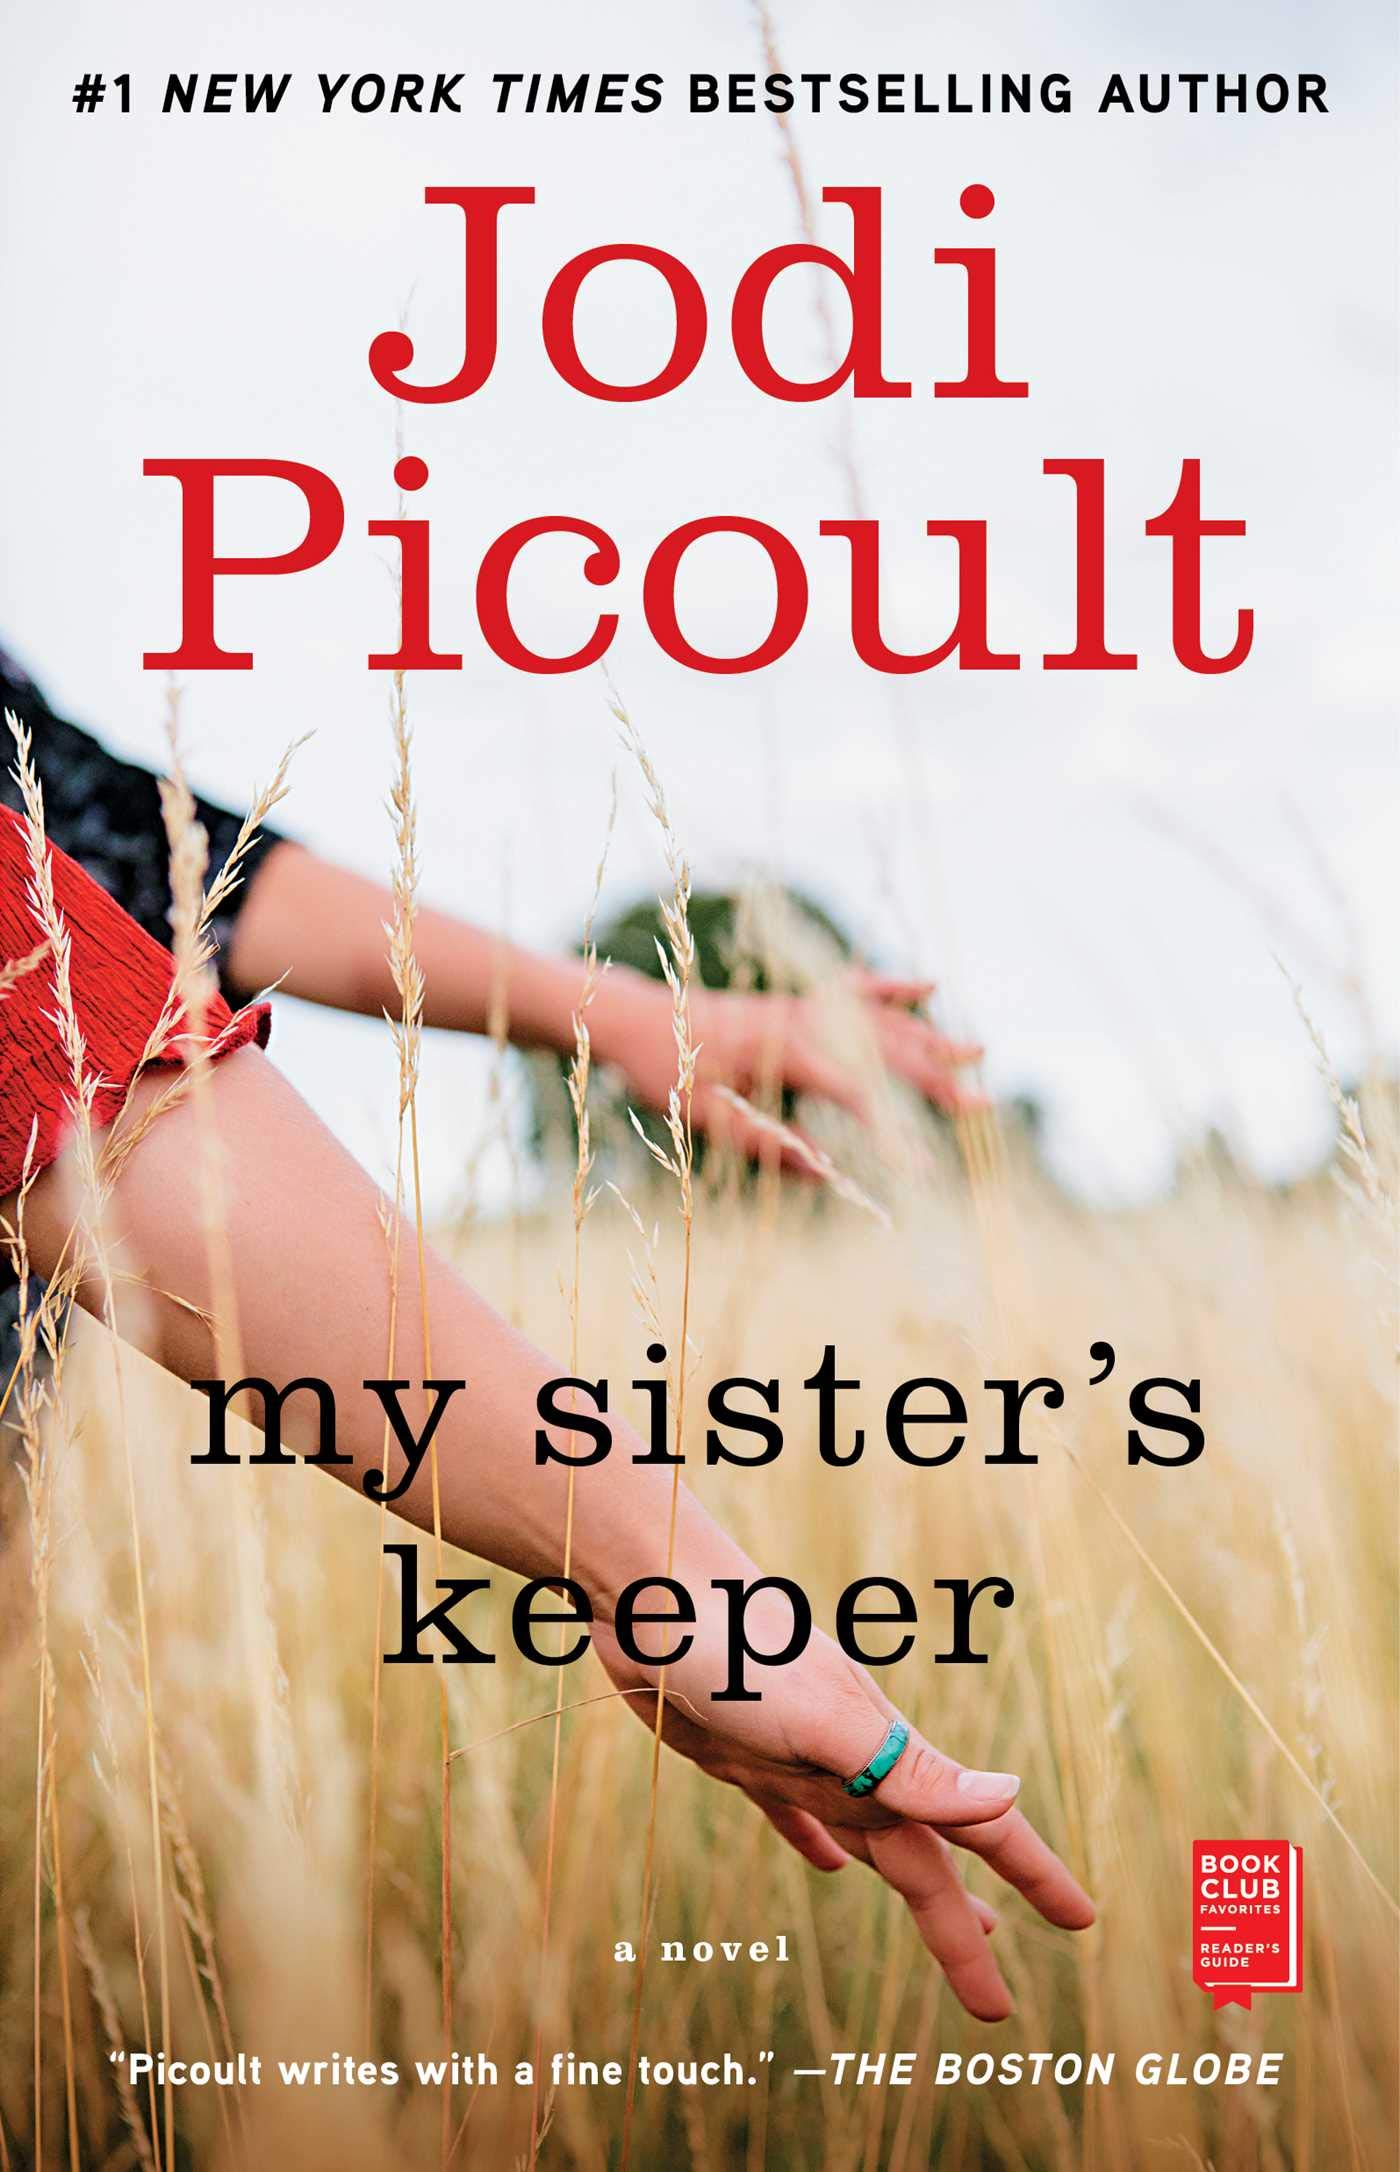 Book Review - My Sister's Keeper by Jodi Picoult